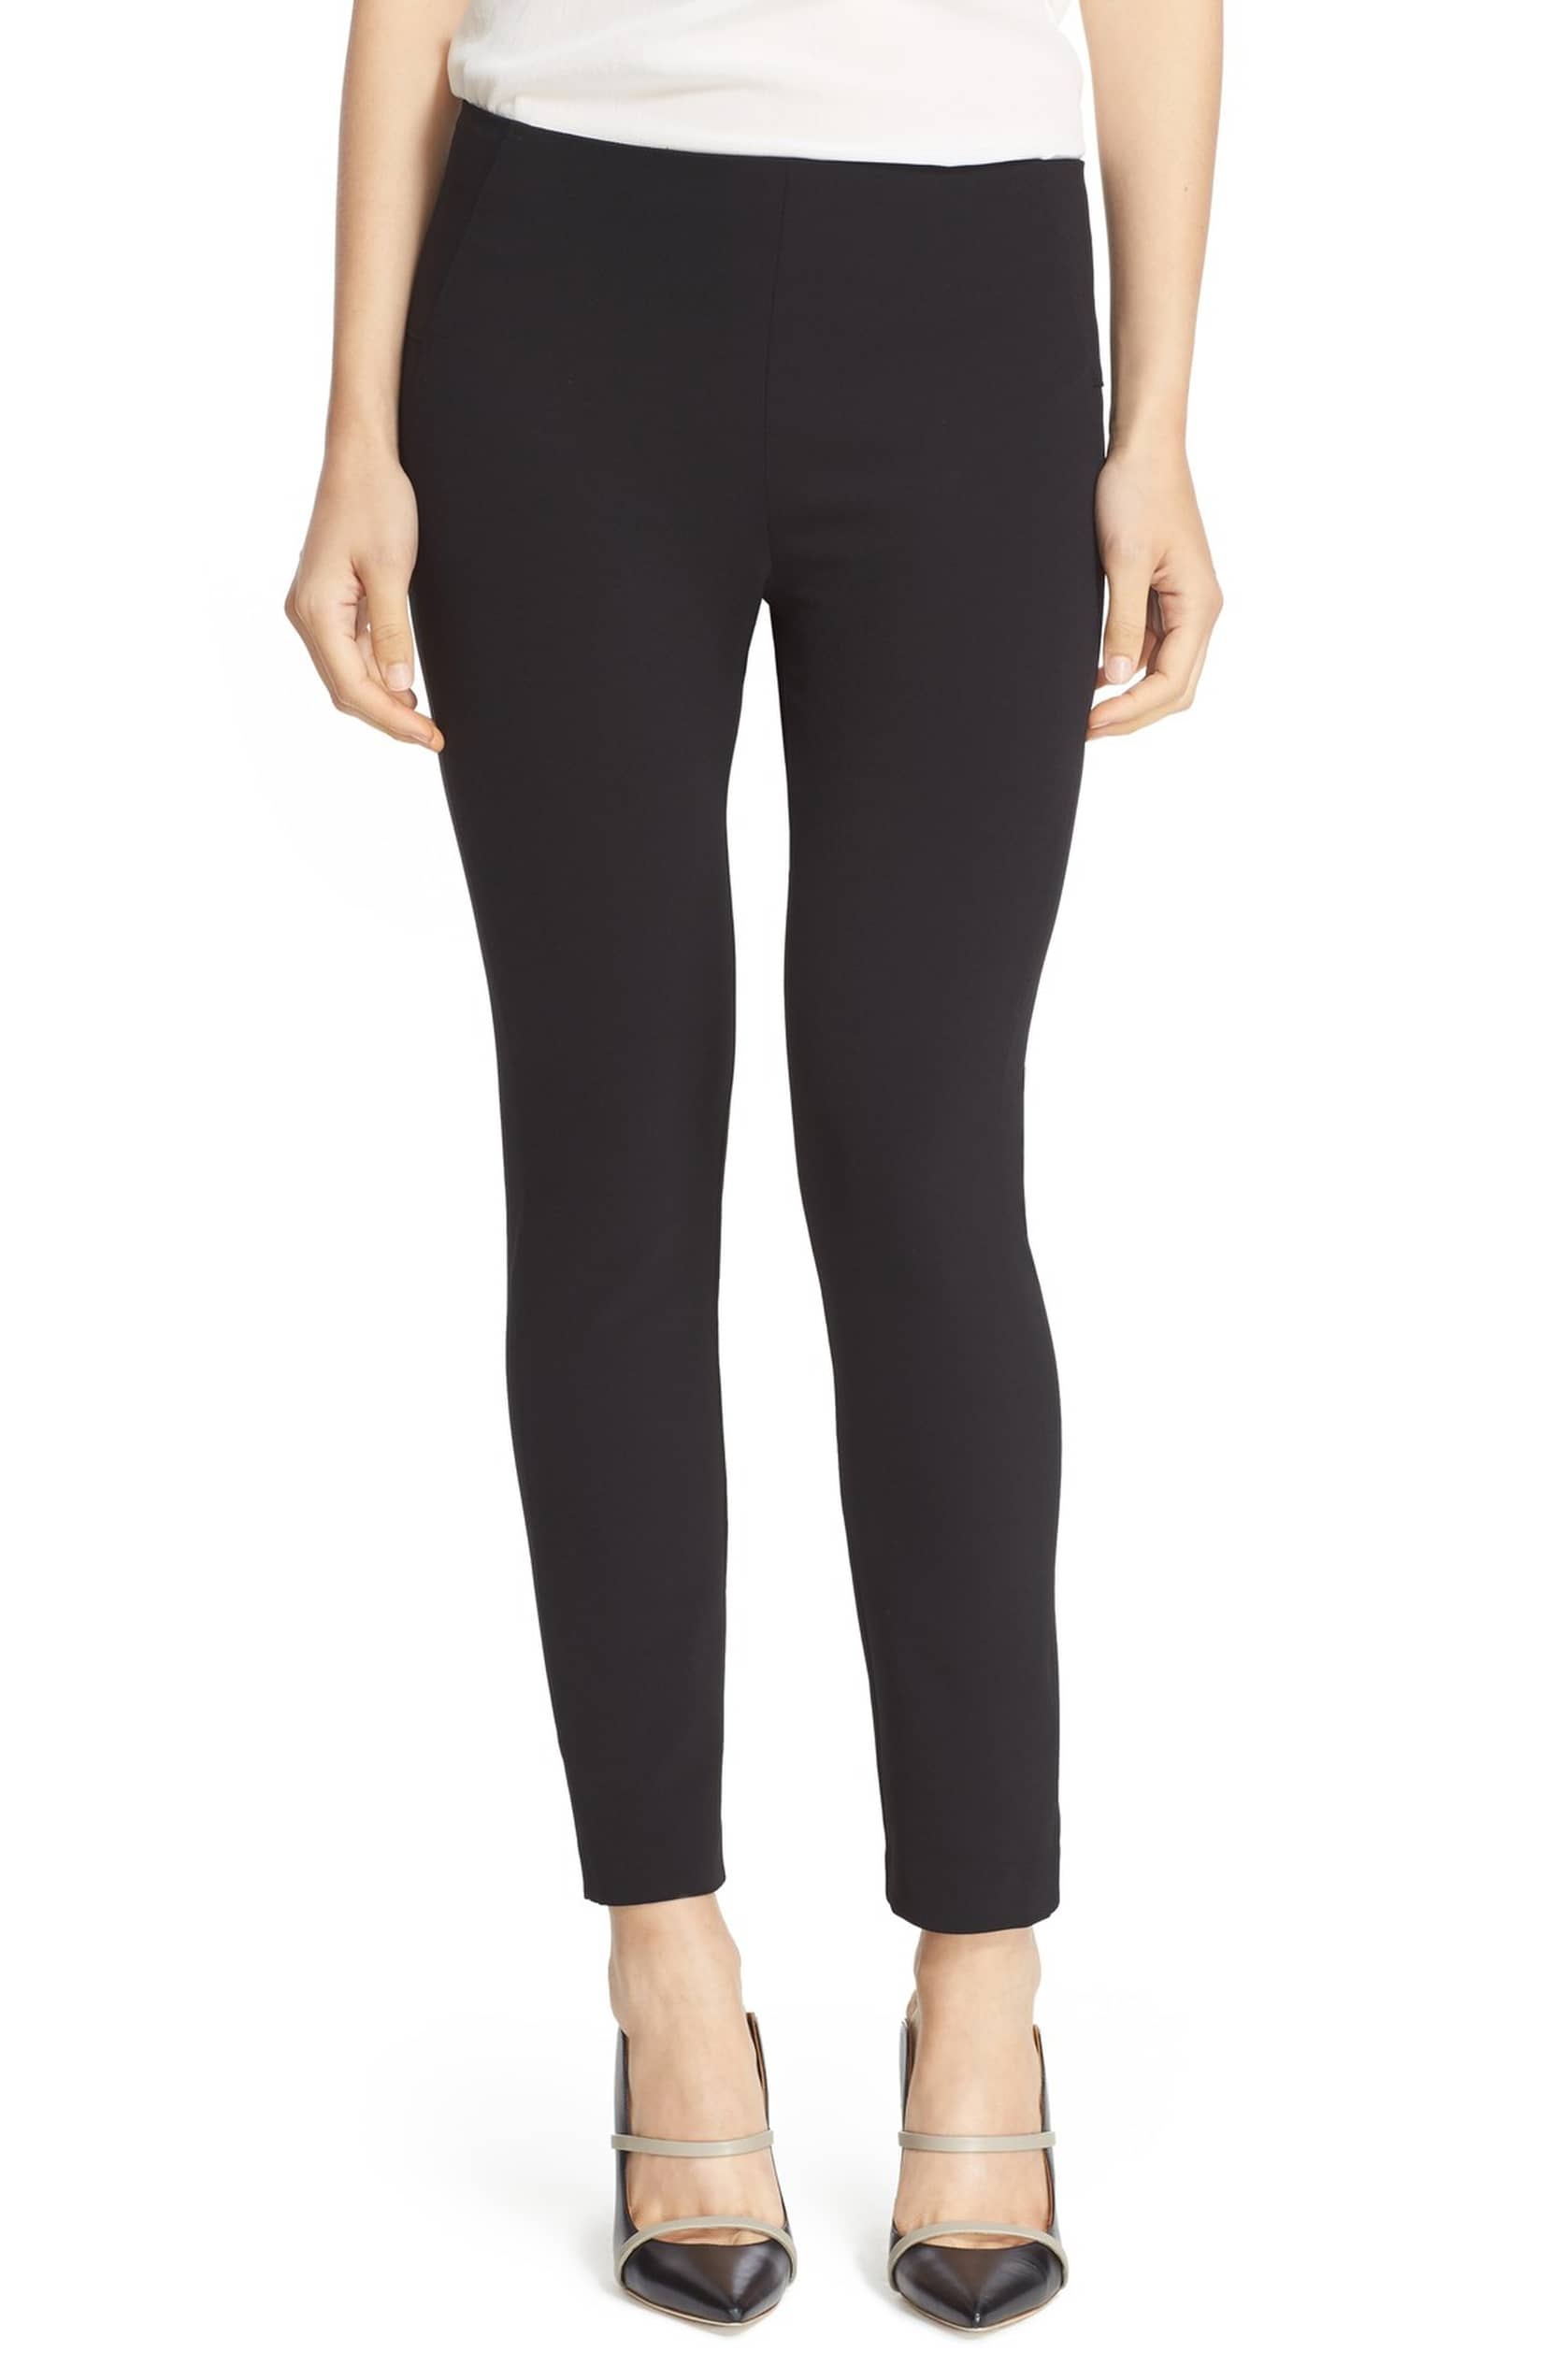 Shop These Comfy Scuba Pants From Veronica Beard